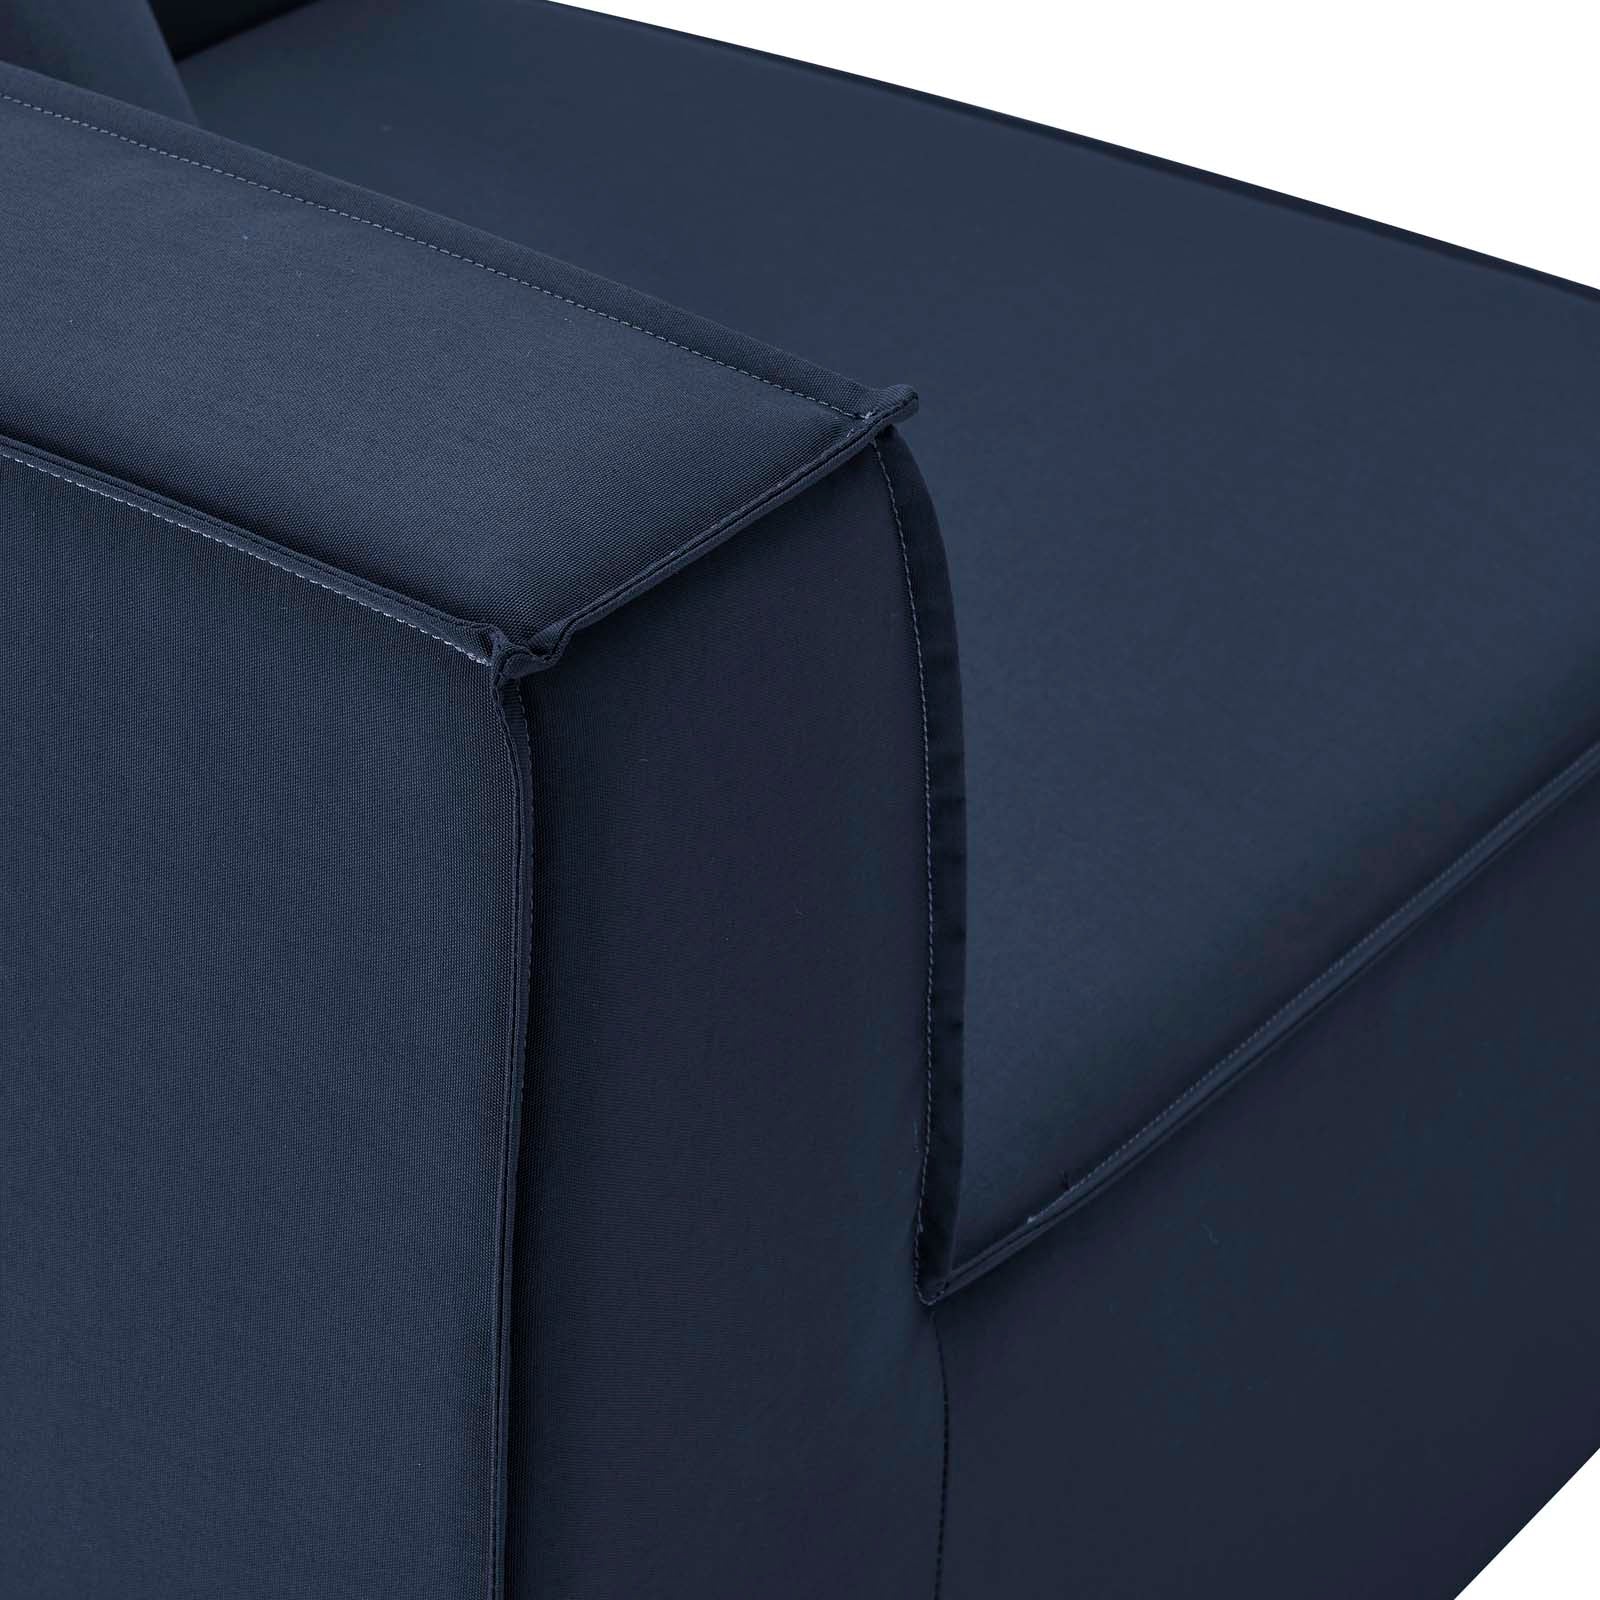 Modway Outdoor Sofas - Saybrook Outdoor Patio Upholstered 2-Piece Sectional Sofa Loveseat Navy